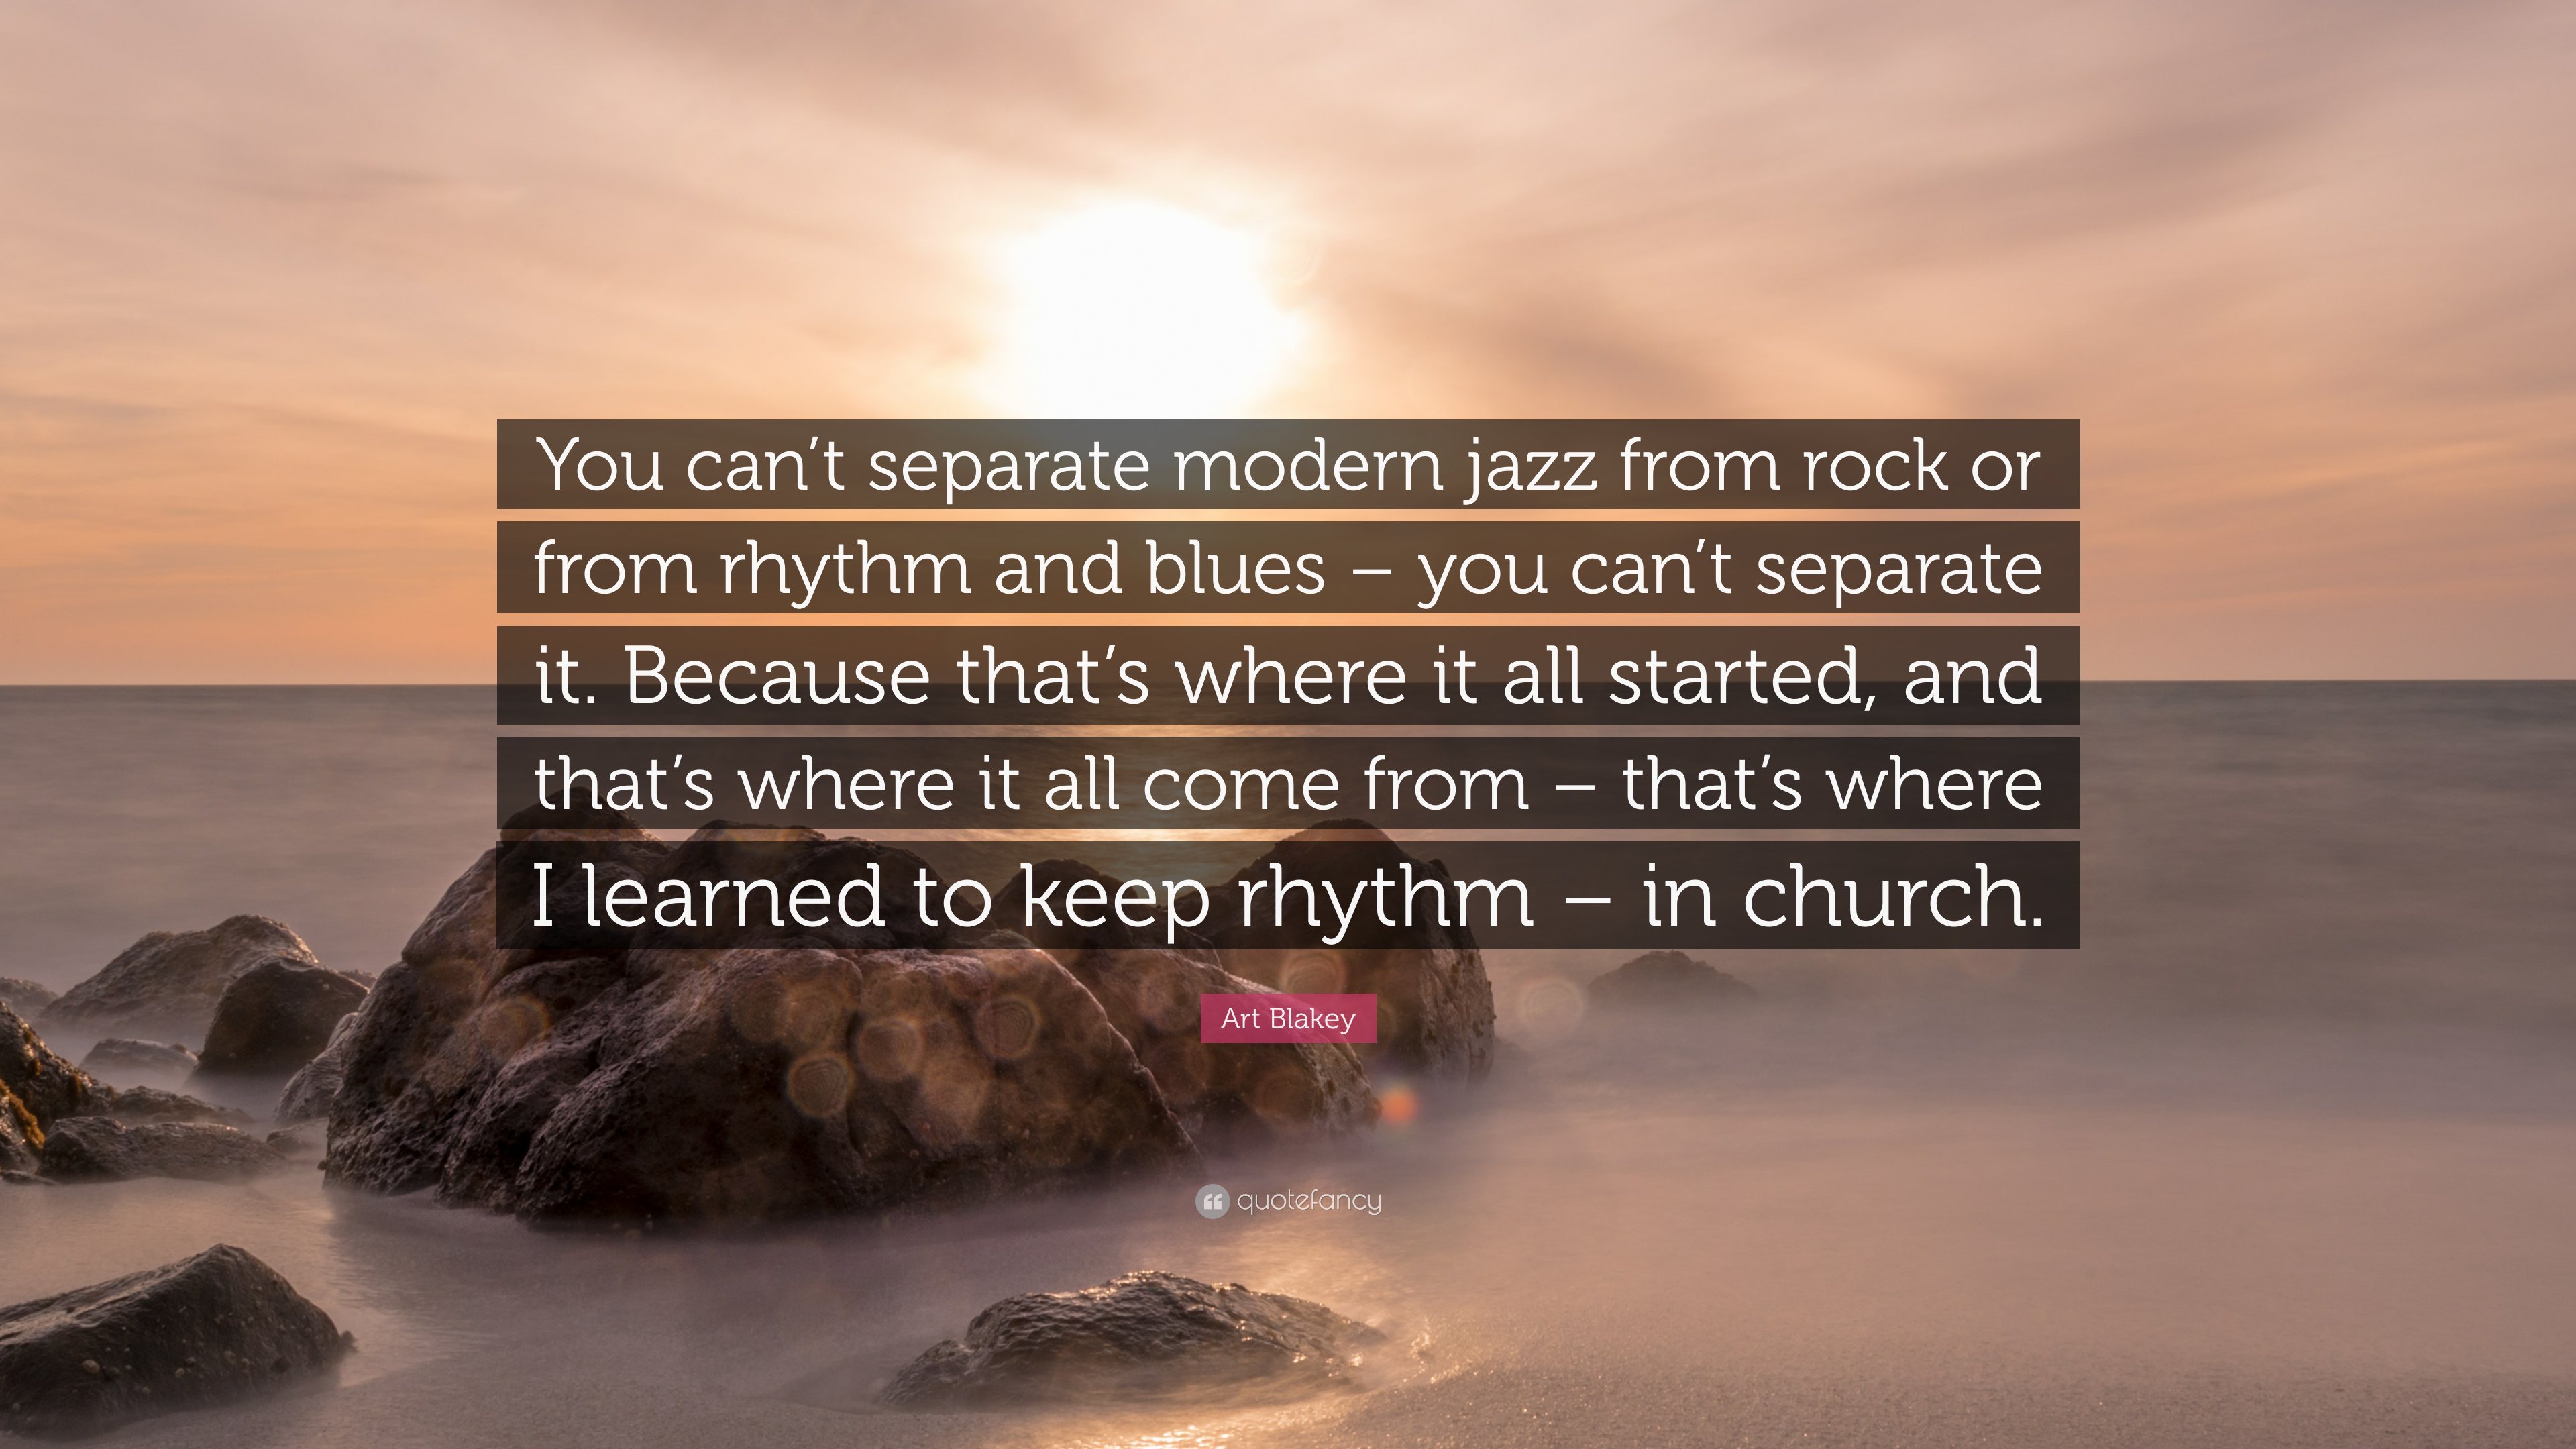 Art Blakey Quote: “You can't separate modern jazz from rock or